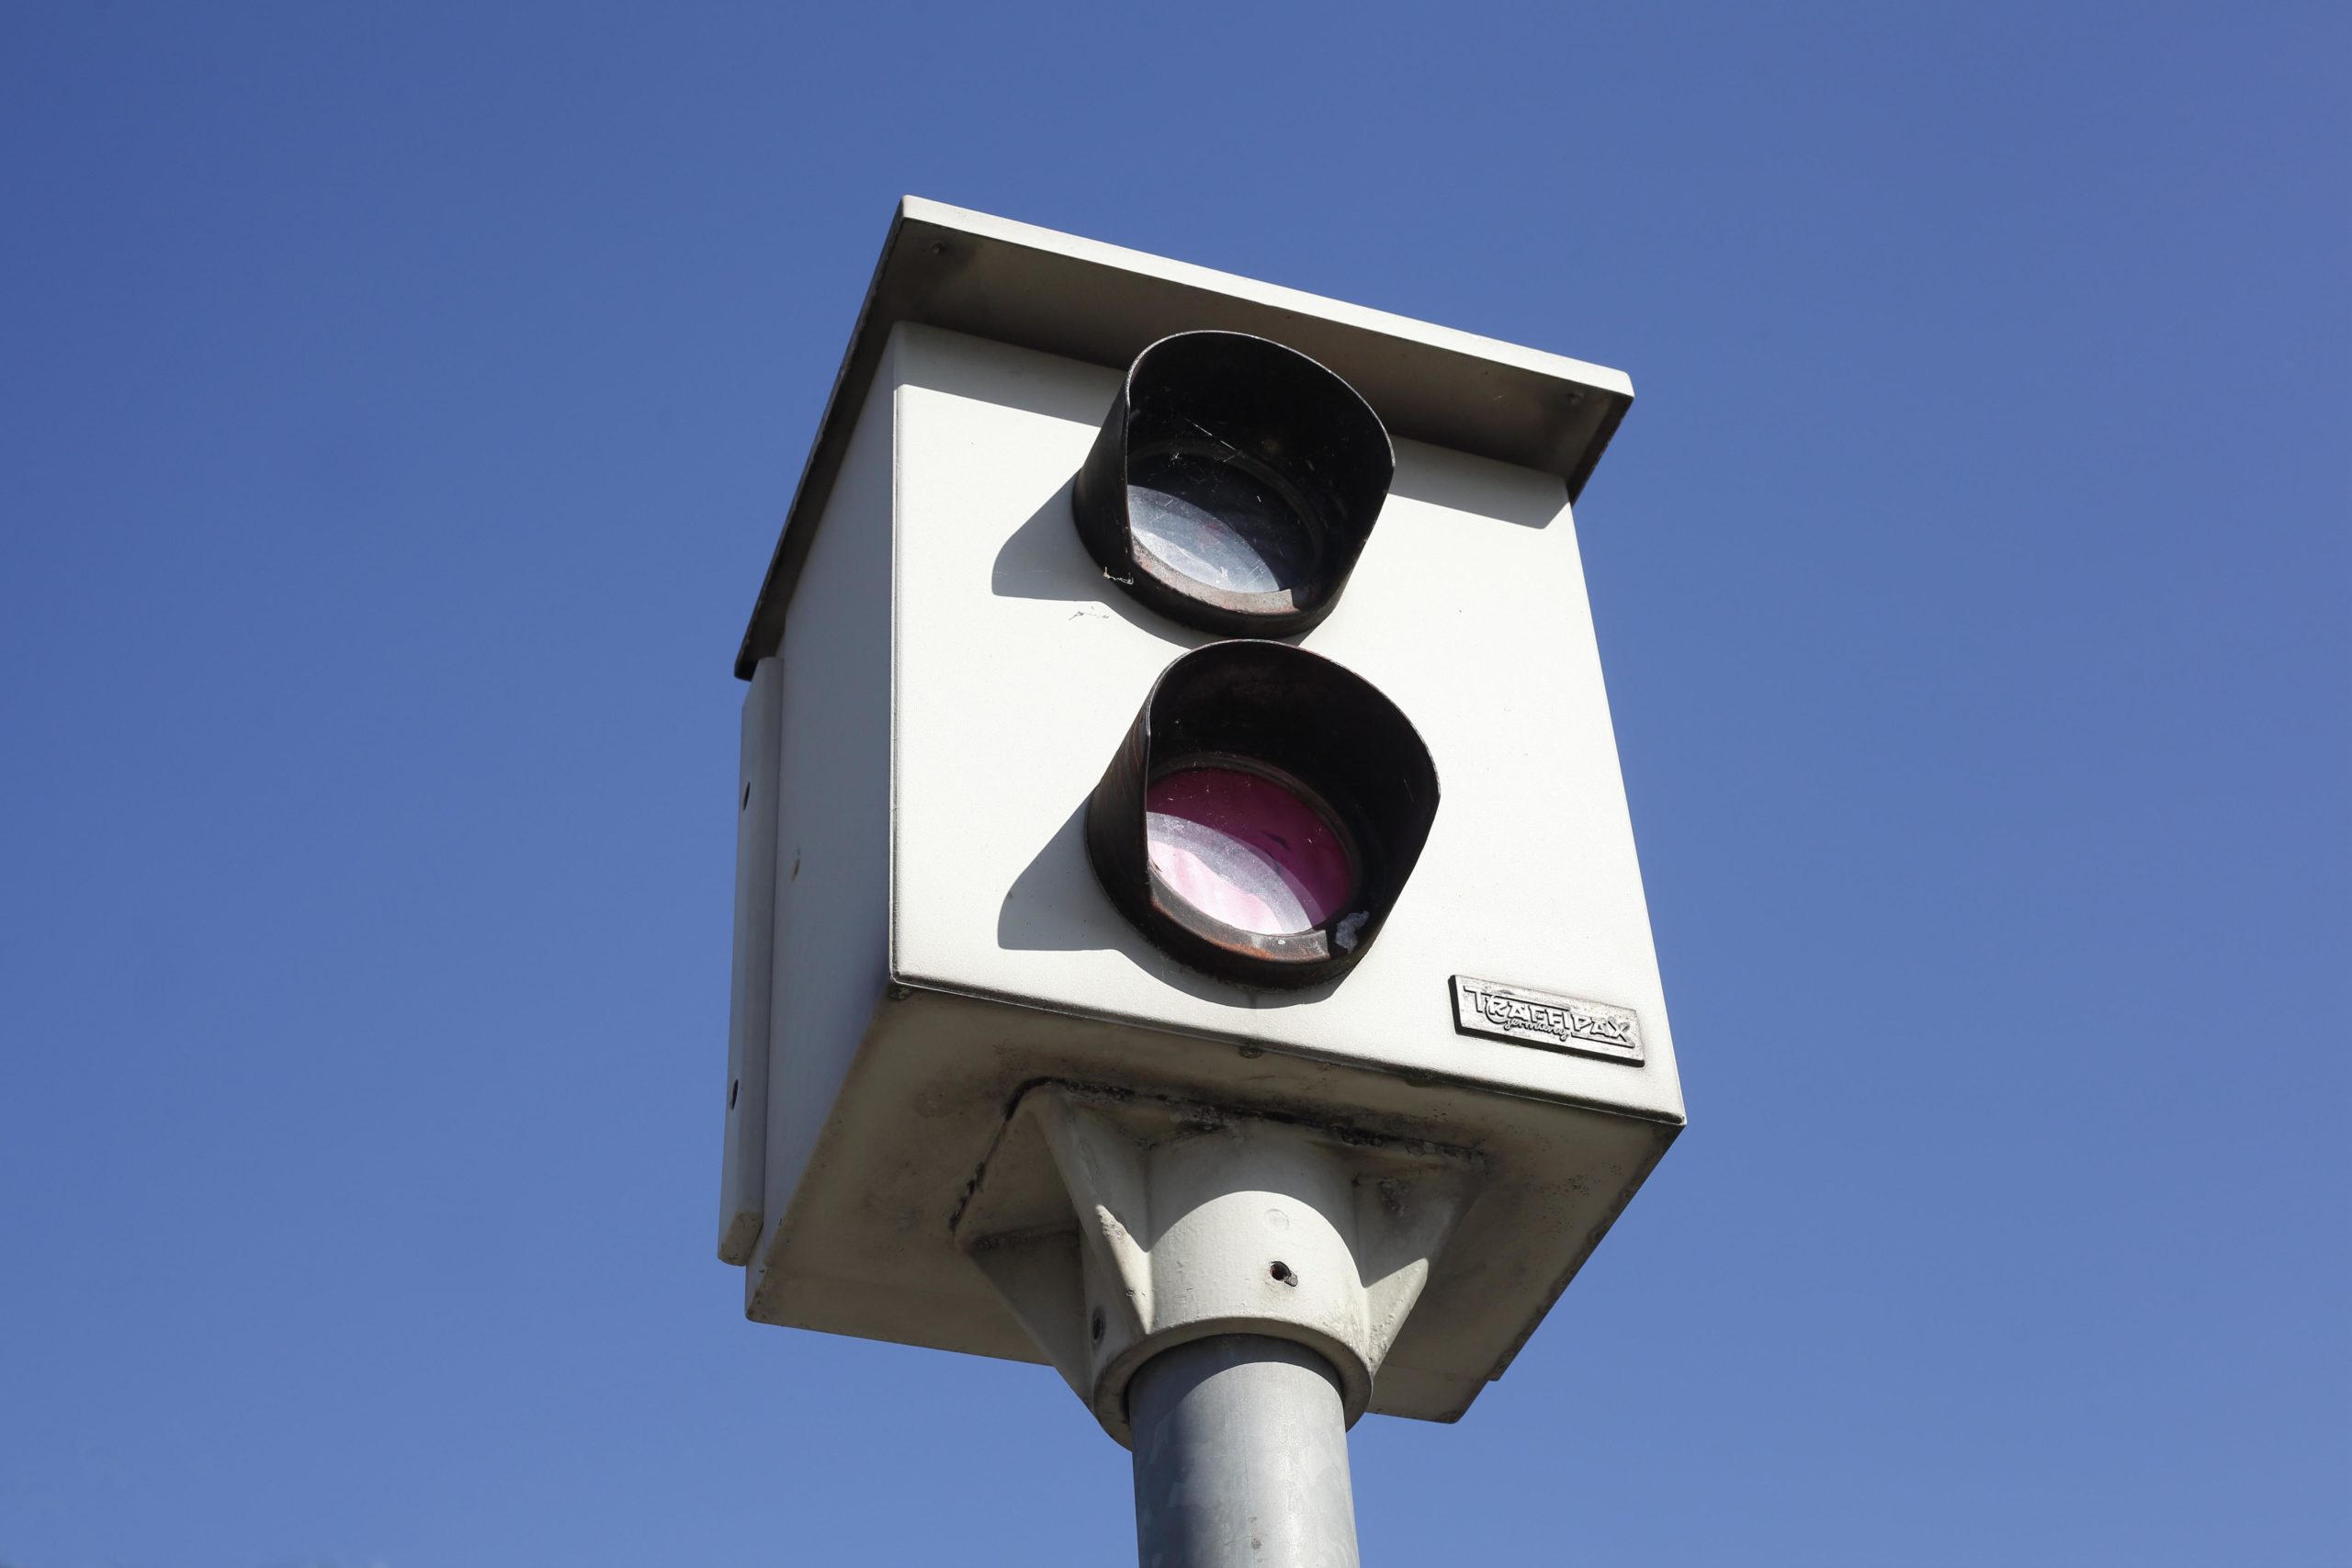 ‘Only 65% of speed cameras in Antwerp operational’